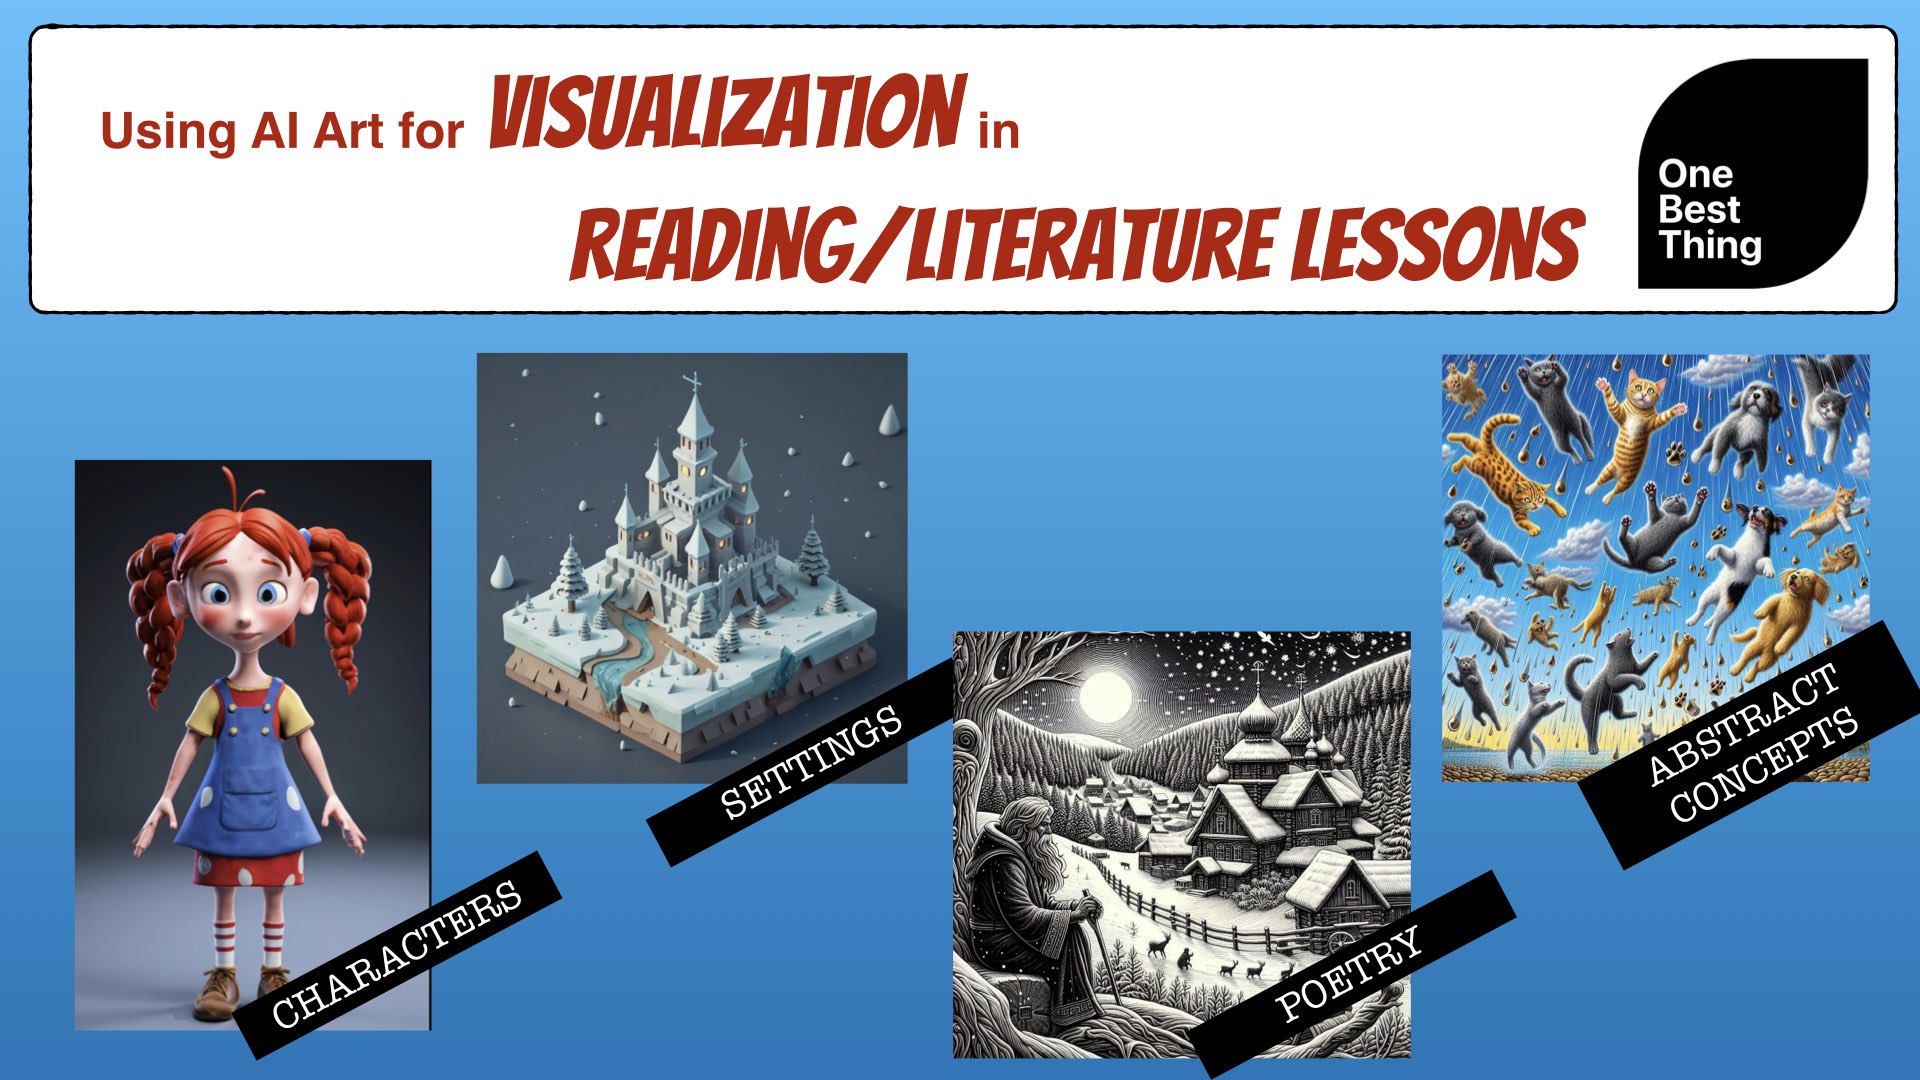 Using AI Art for Visualization in Reading/Literature Lessons